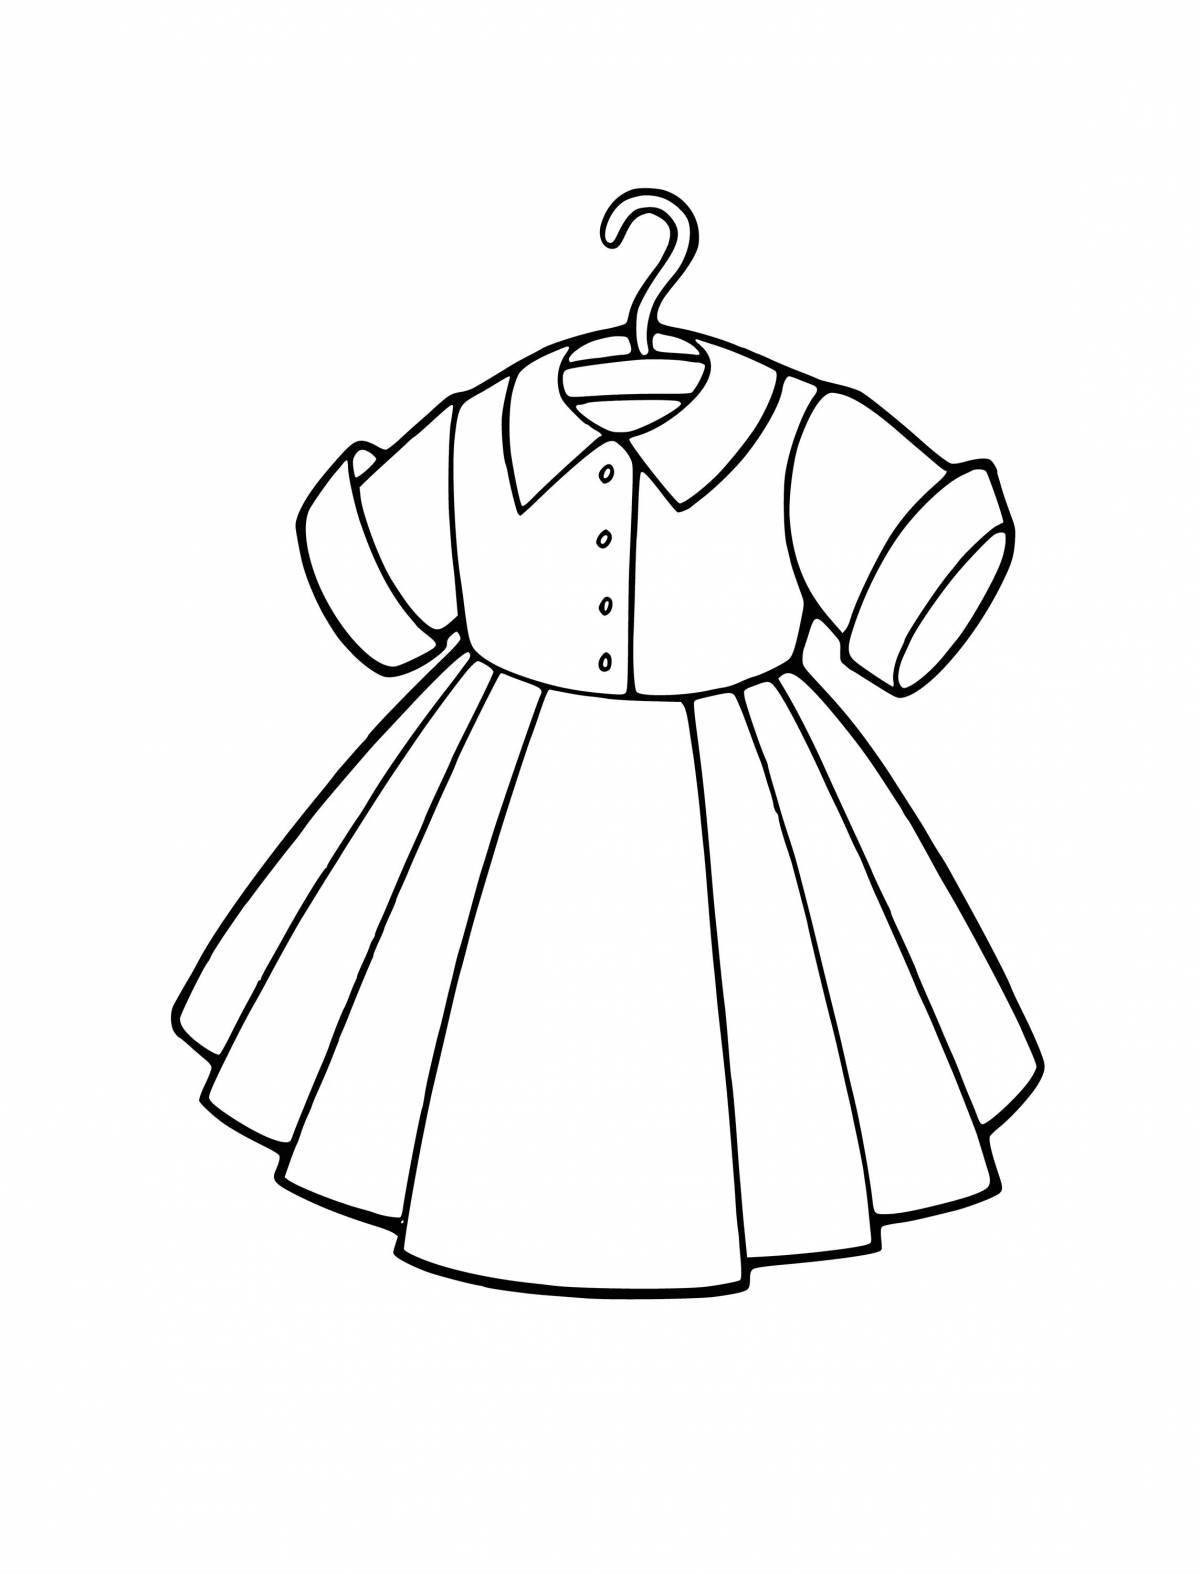 Coloring page cute doll dress for 3-4 year olds